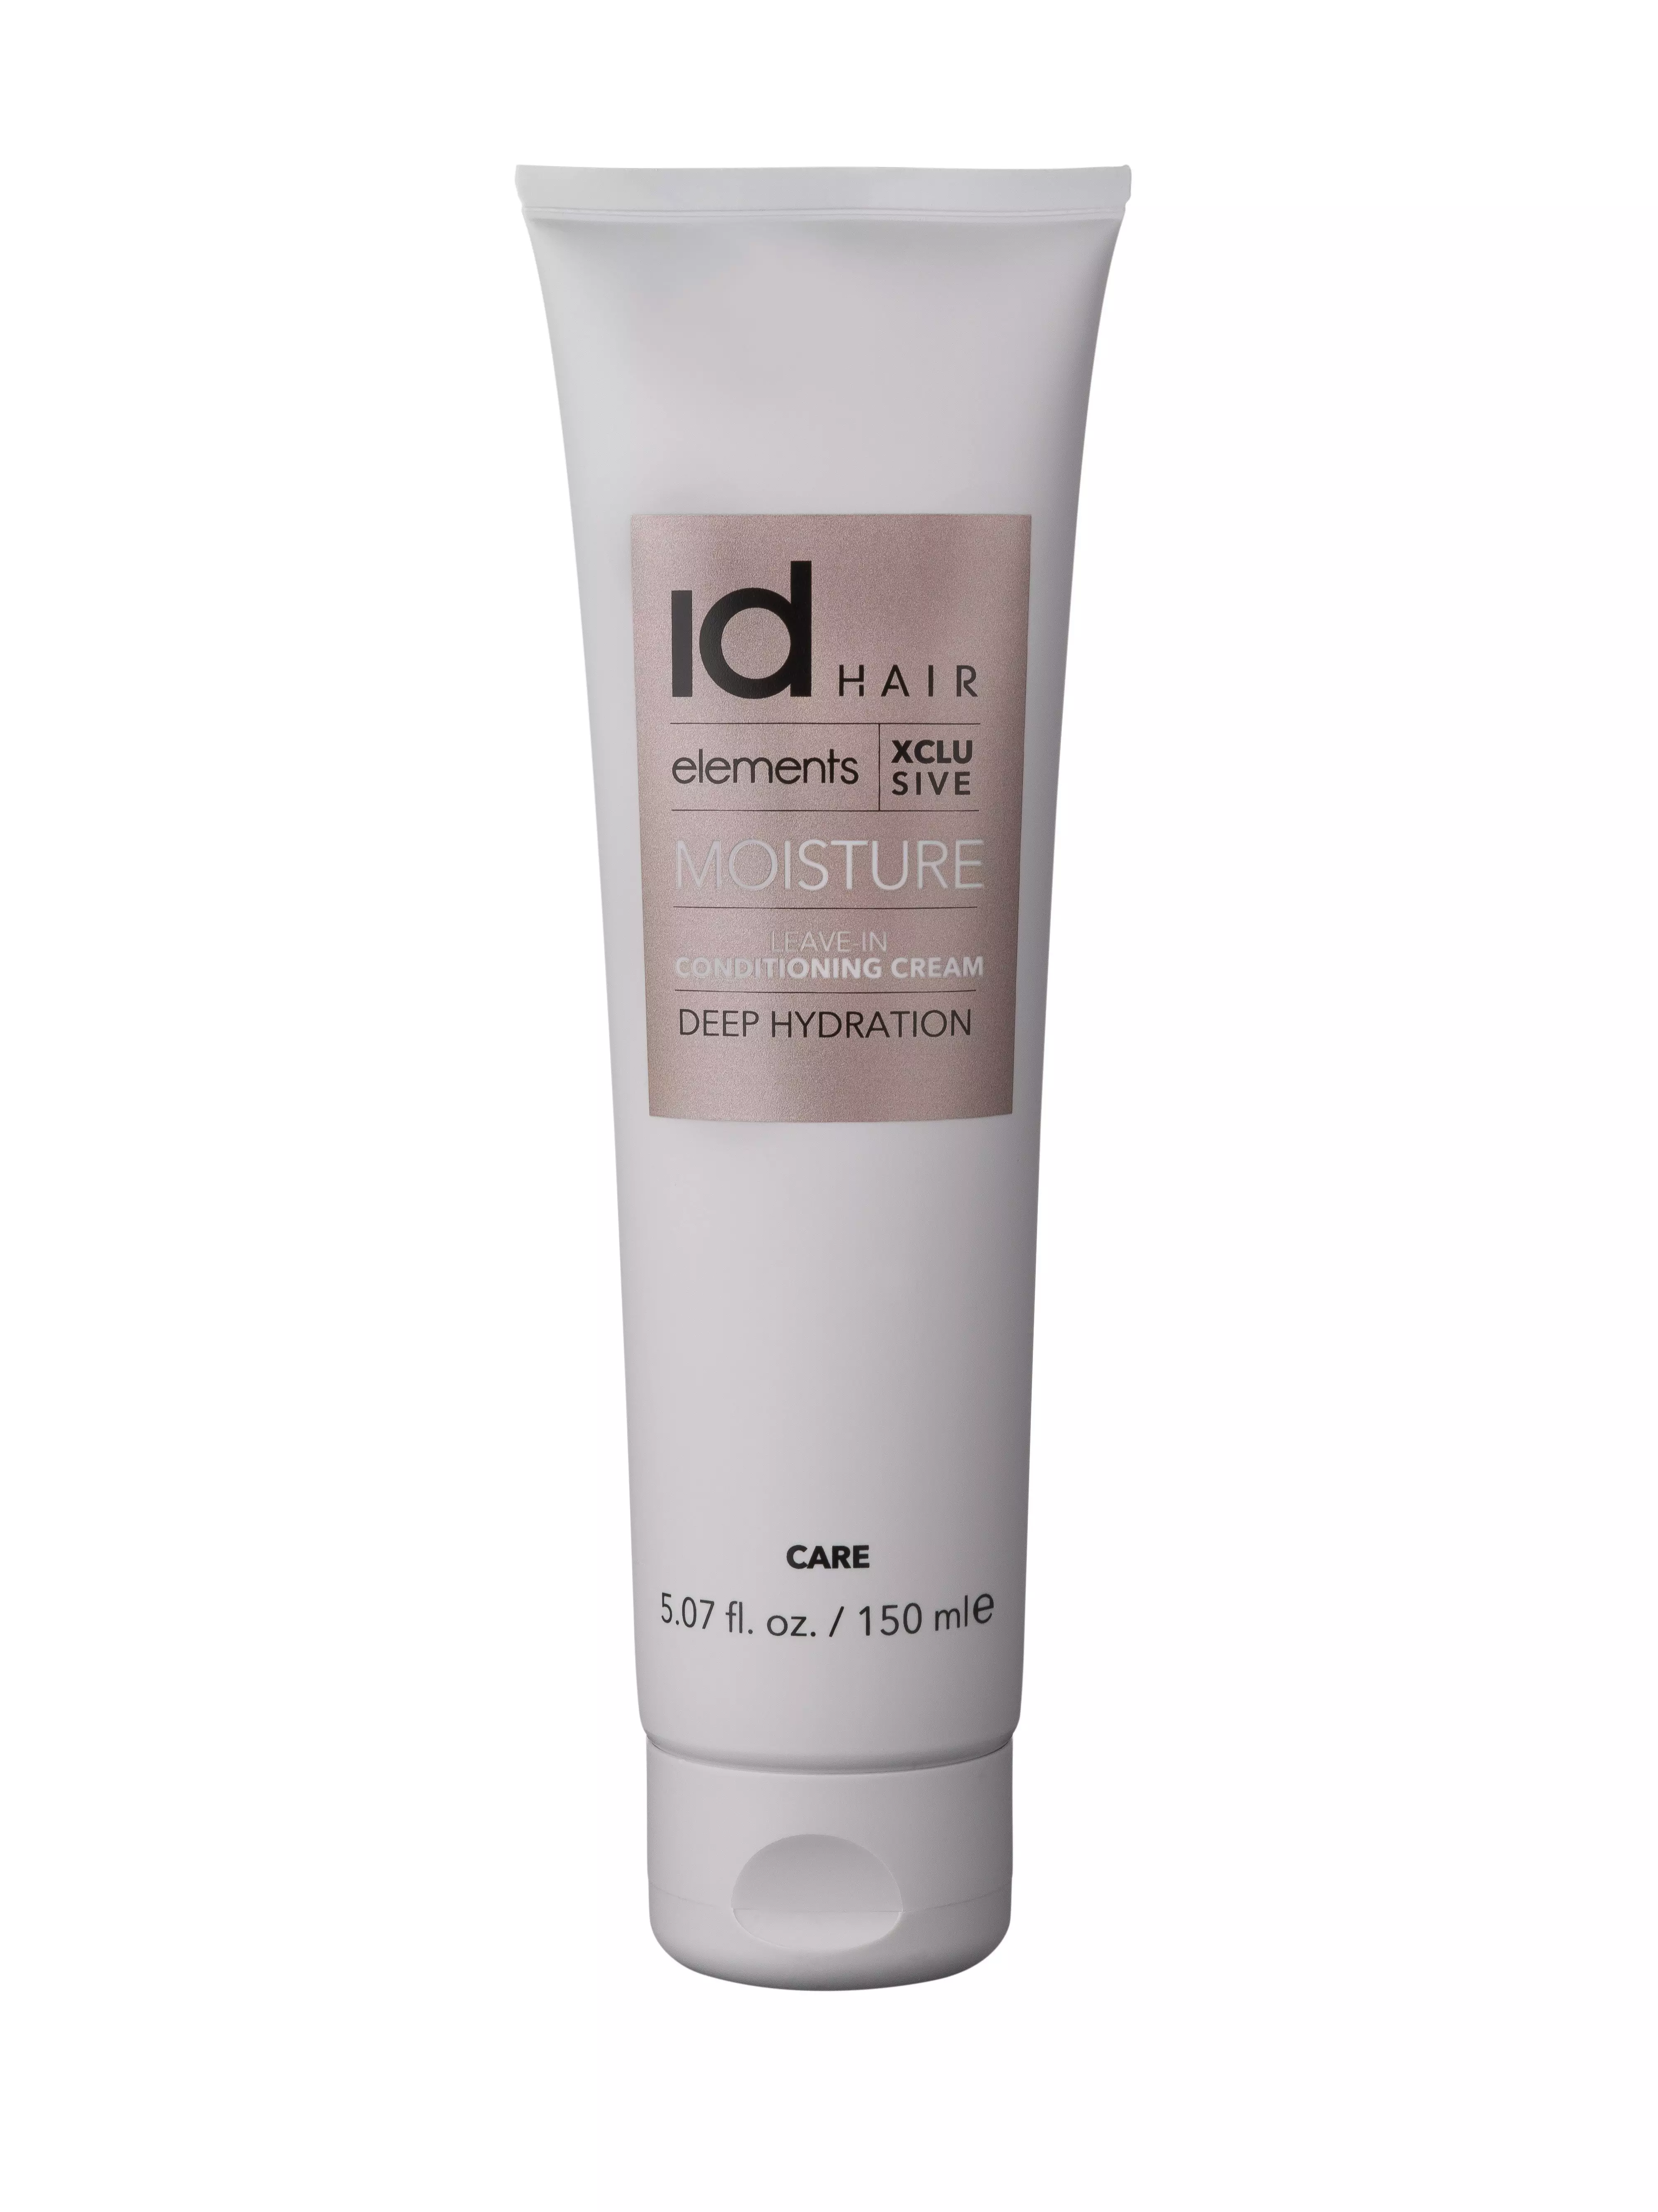 Idhair Elements Xclusive Moisture Leave-In Conditioning